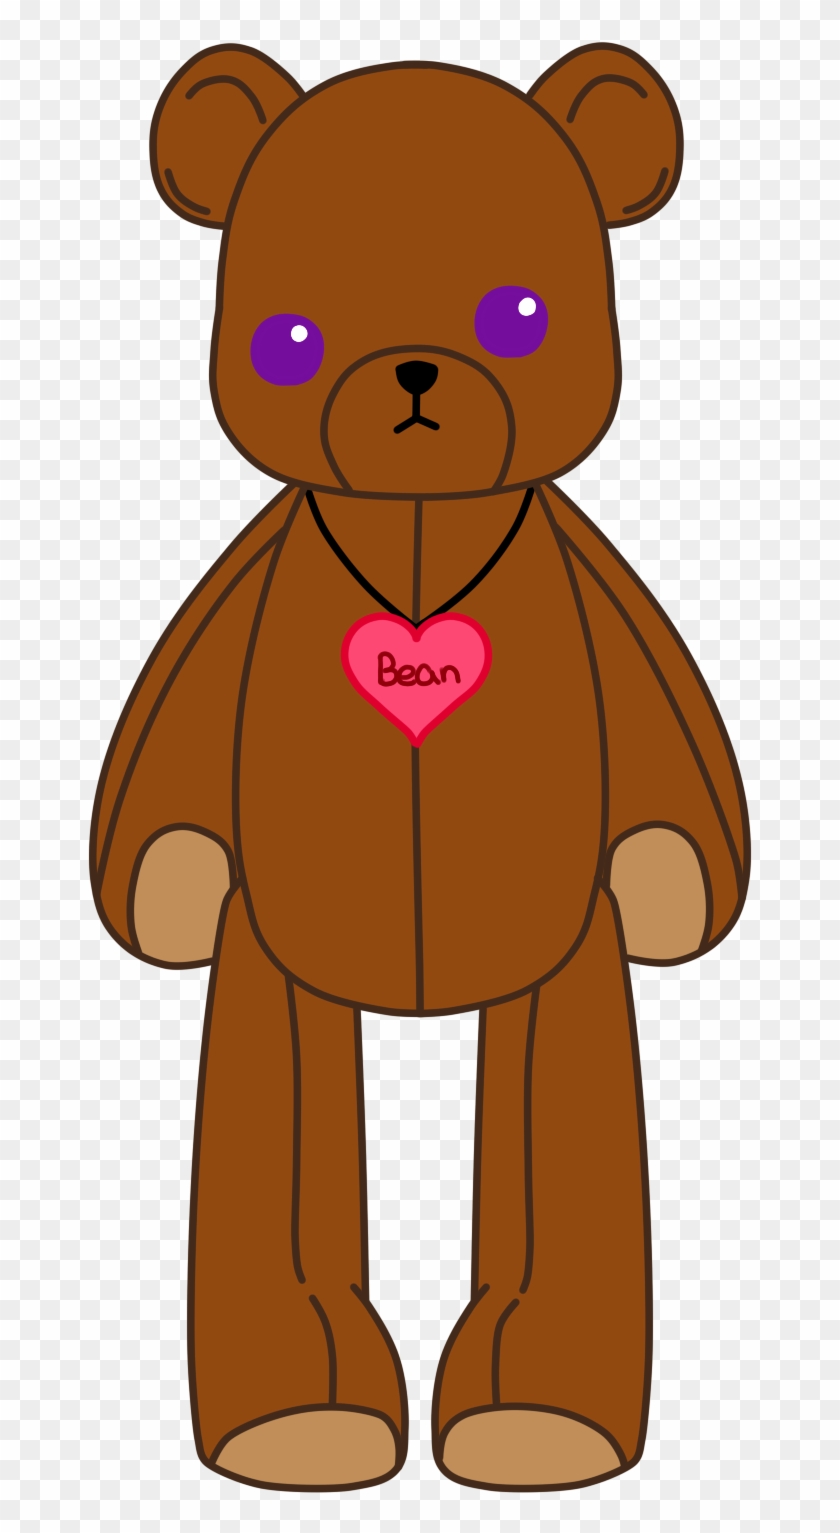 Our Love Child Bean The Bear By Th3randomartist - Drawing #623873